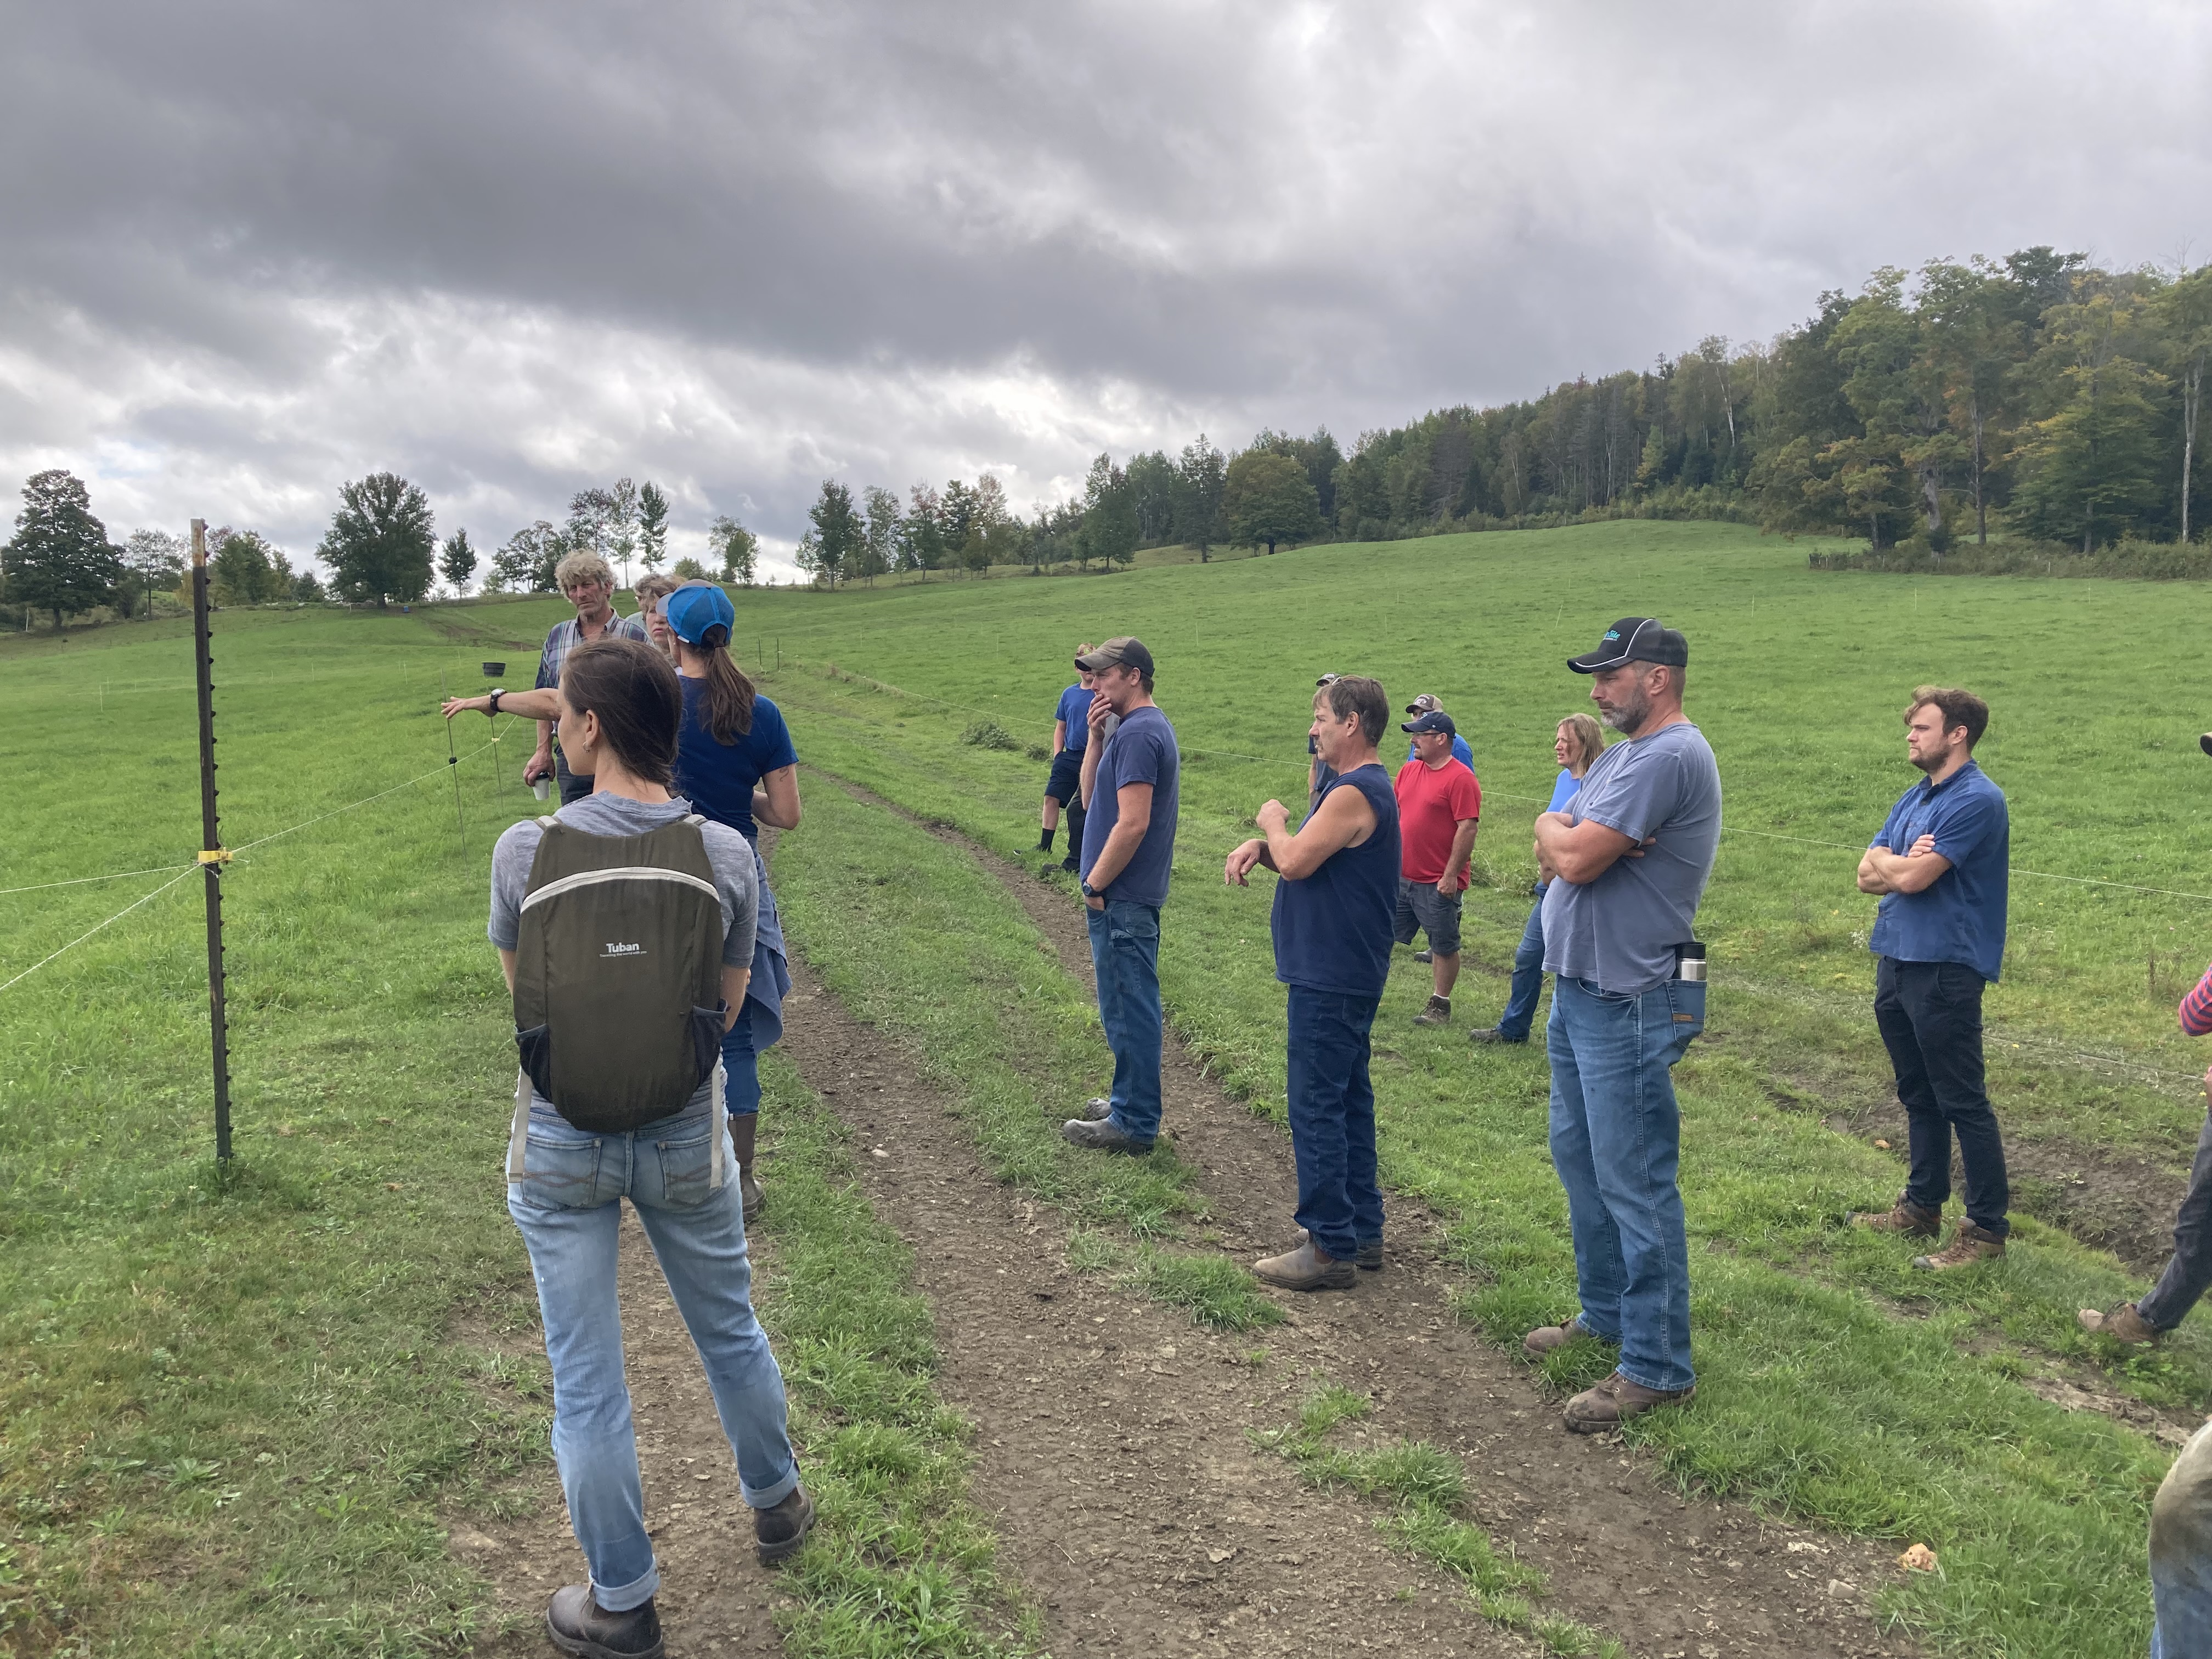 Cohort dairy farmers look out over a pasture.